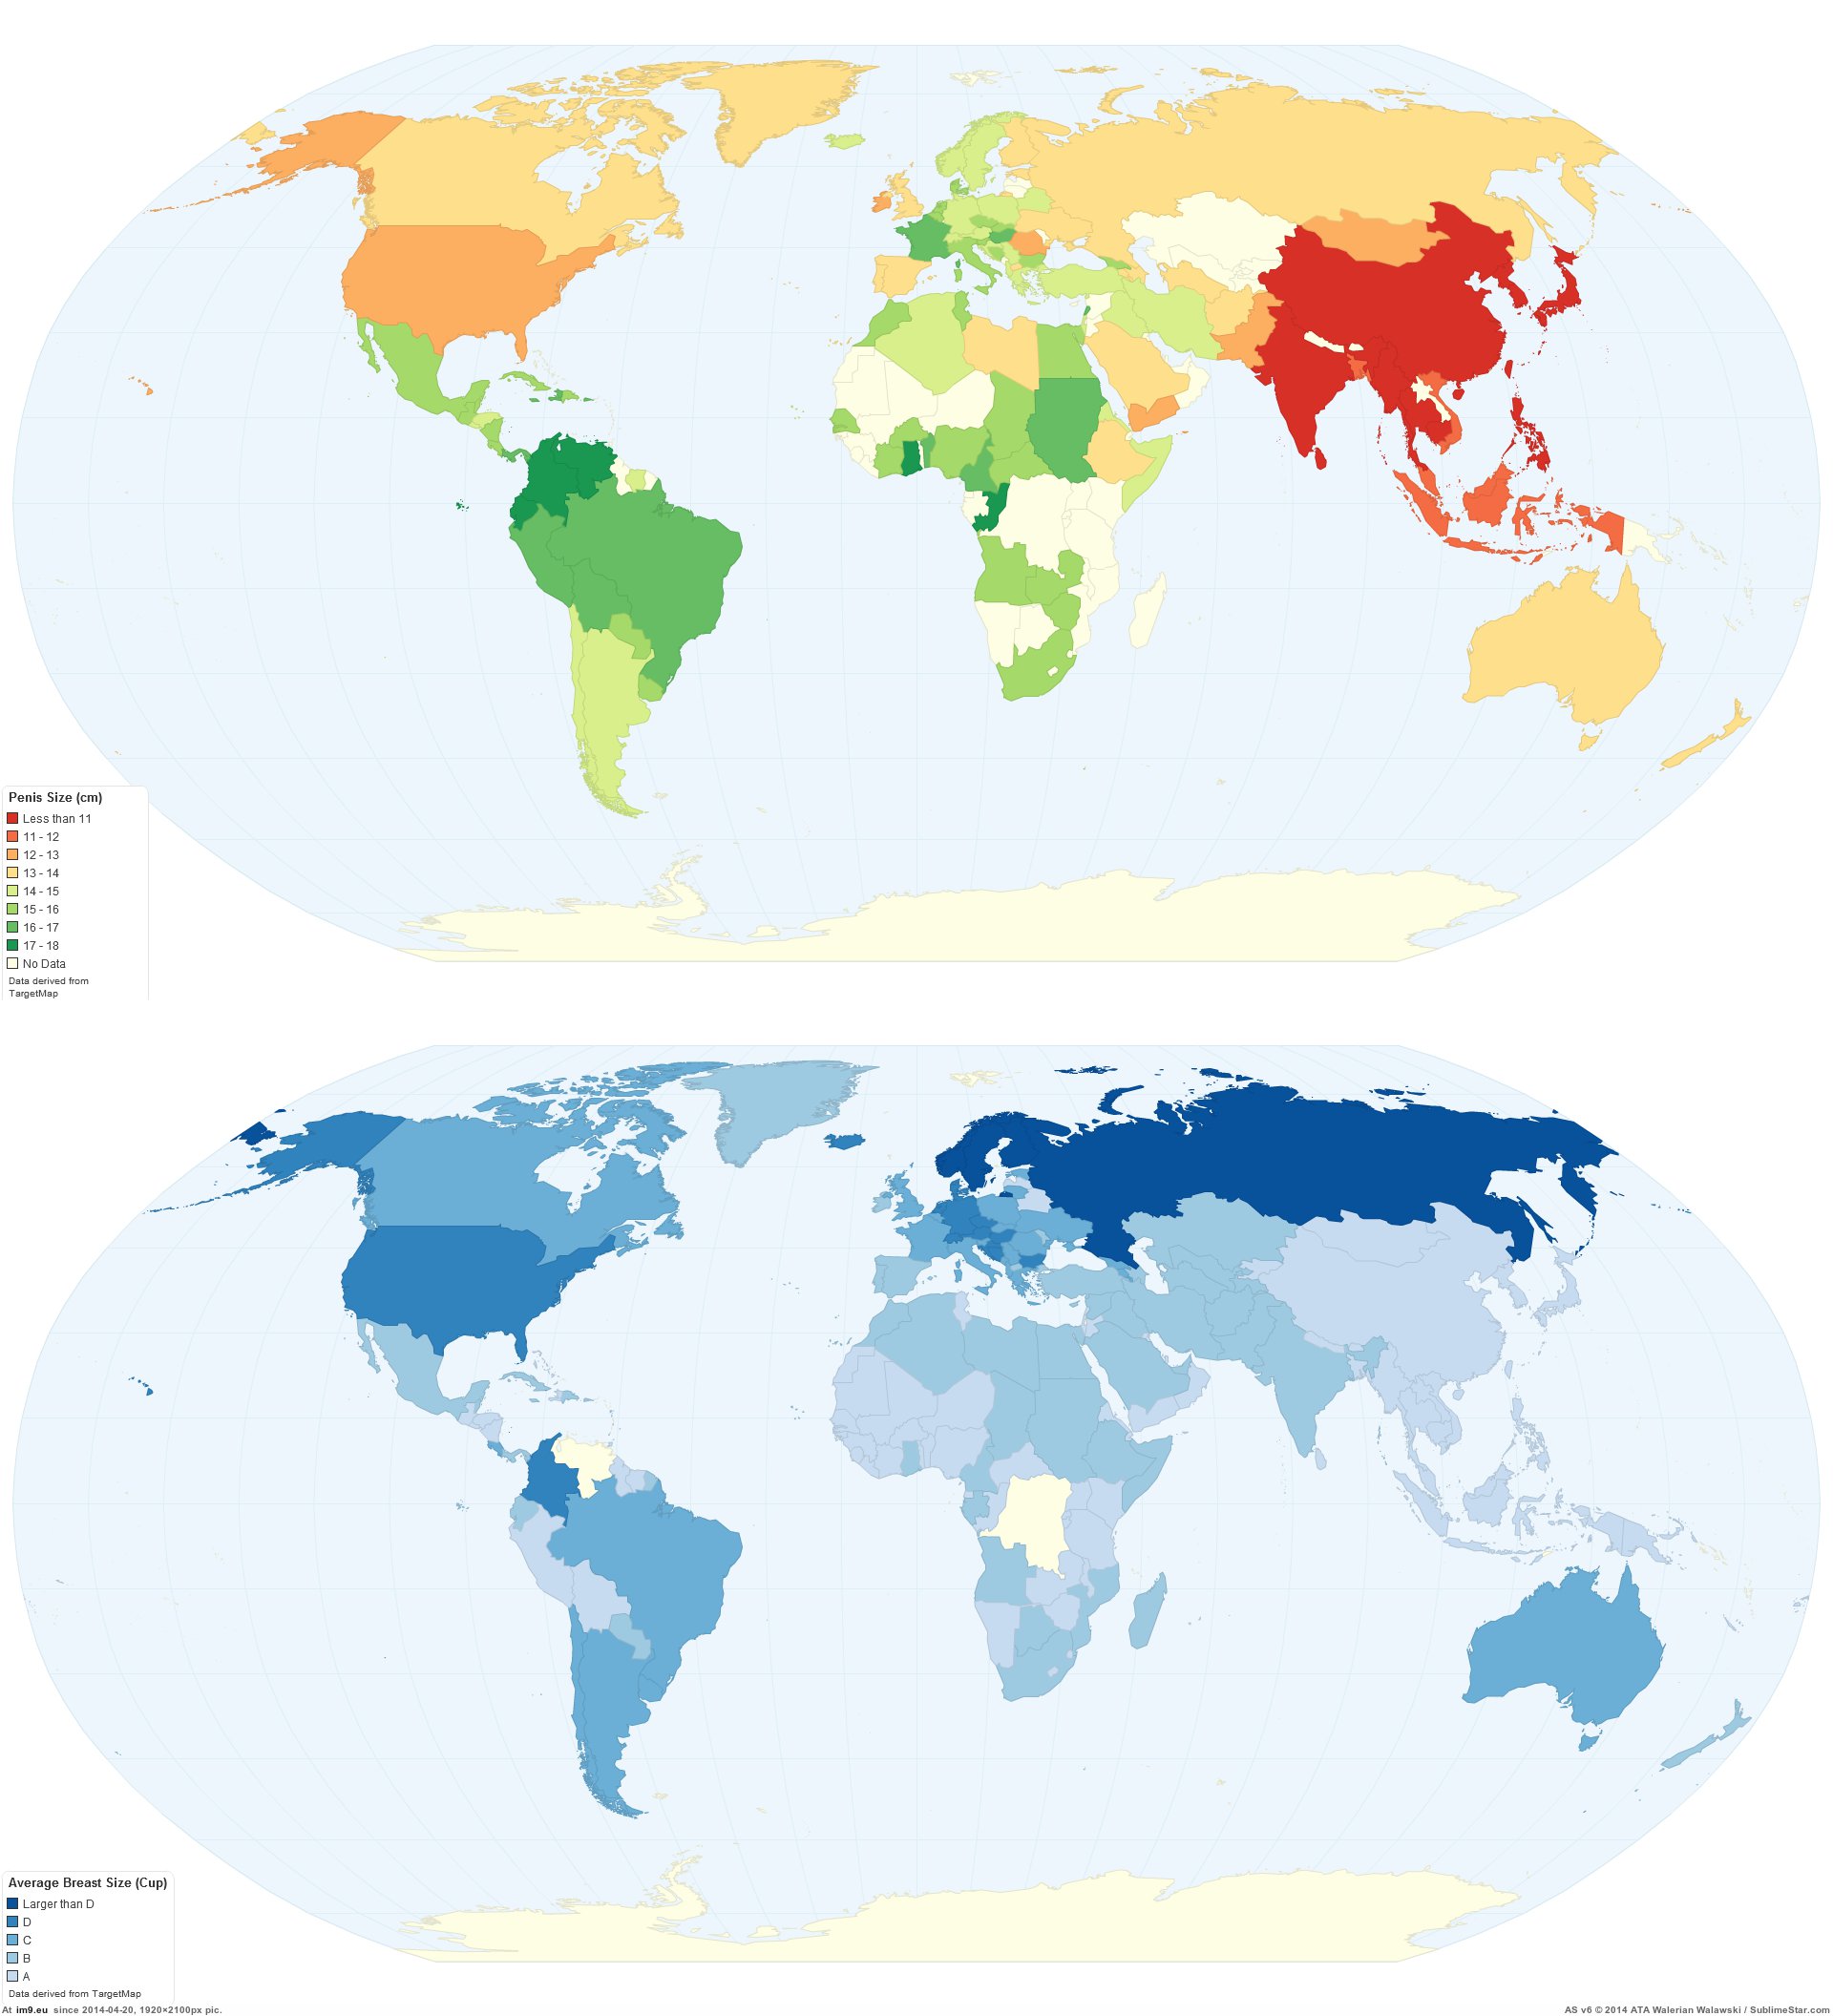 http://p.im9.eu/mapporn-average-penis-and-breast-size-across-the-globe-1920x2100.jpg